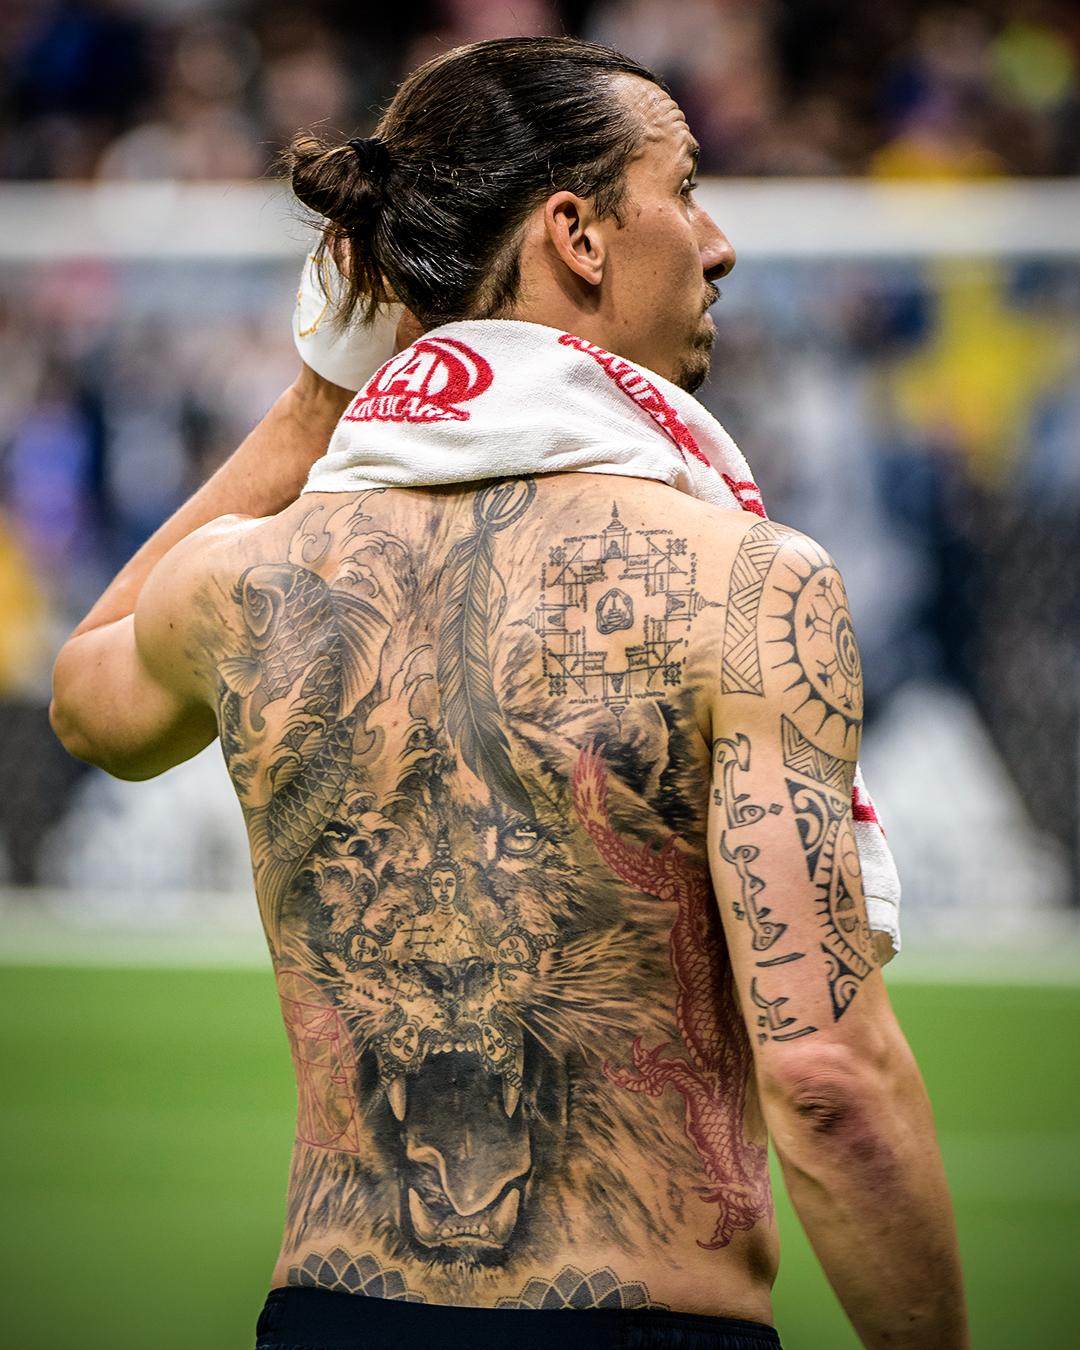 B/R Football on X: Ballers with tattoos on their back 💉 https